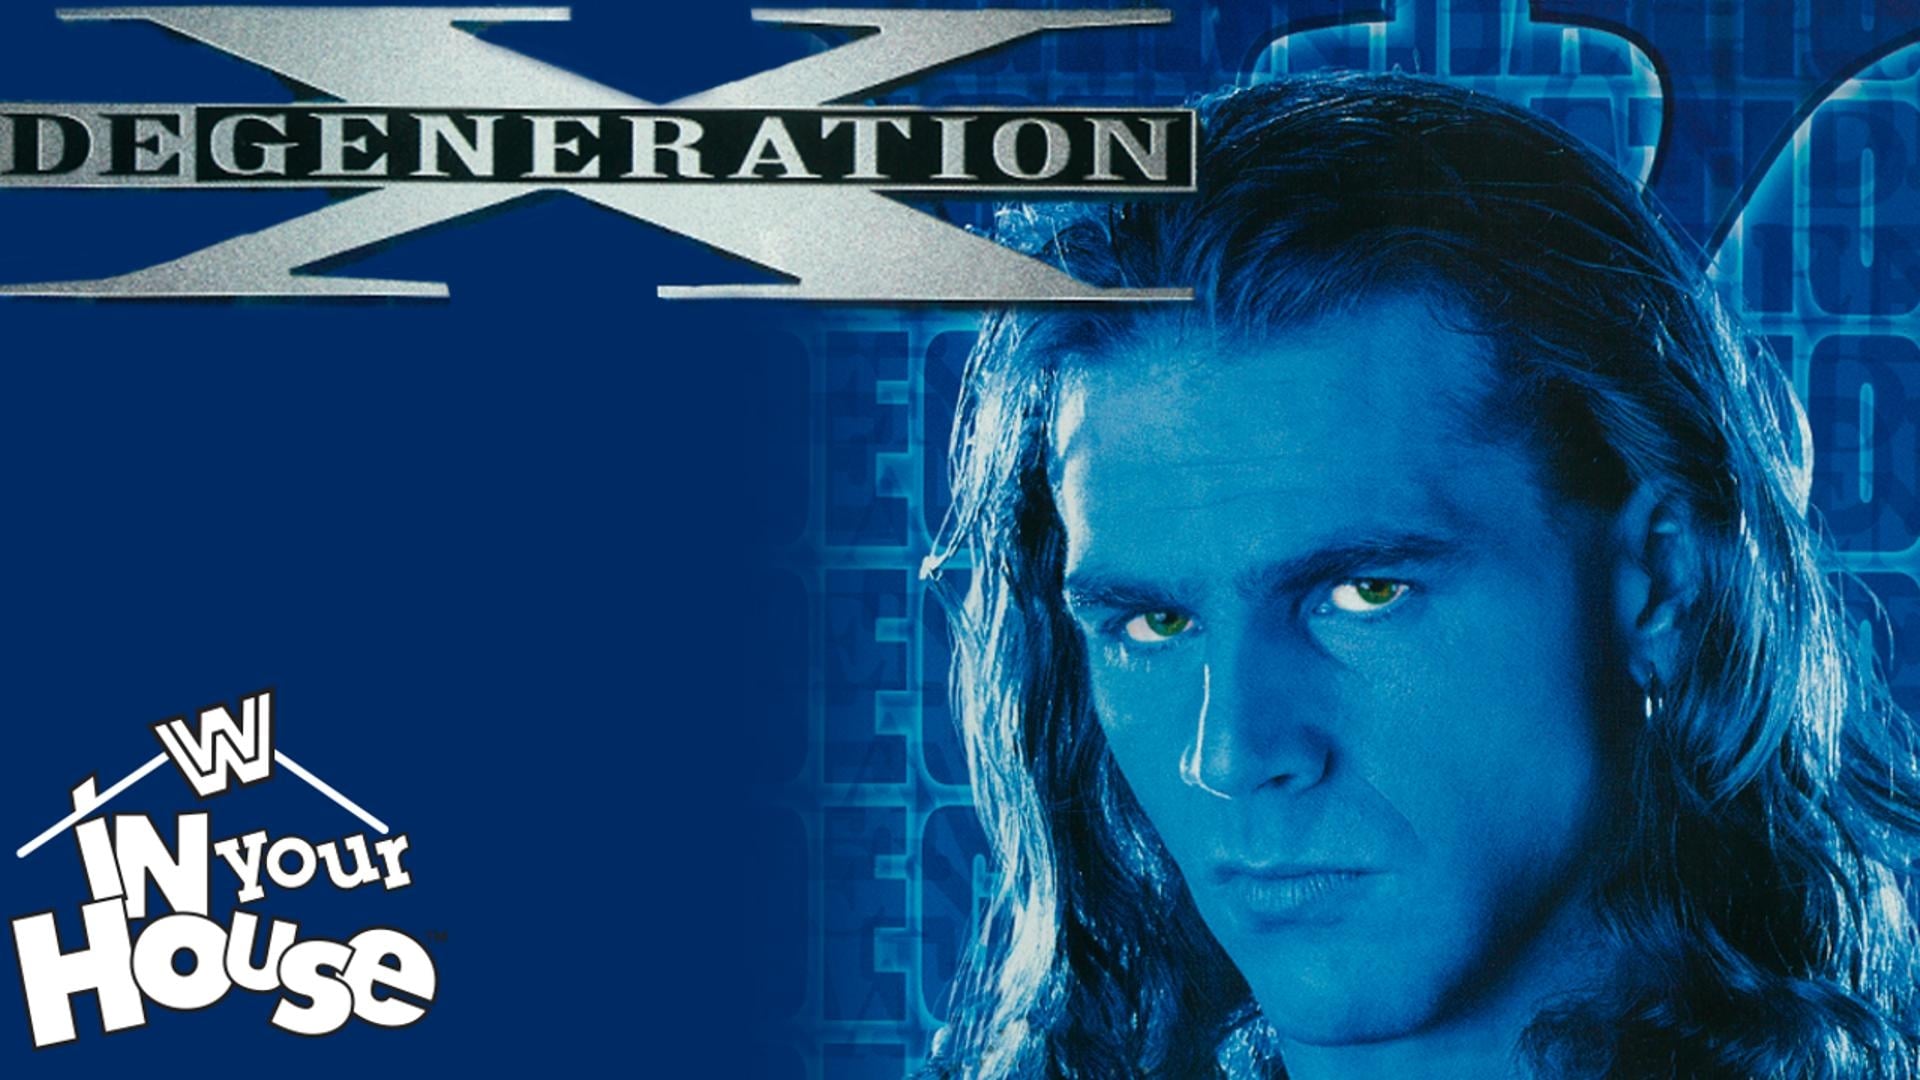 WWE D-Generation X: In Your House